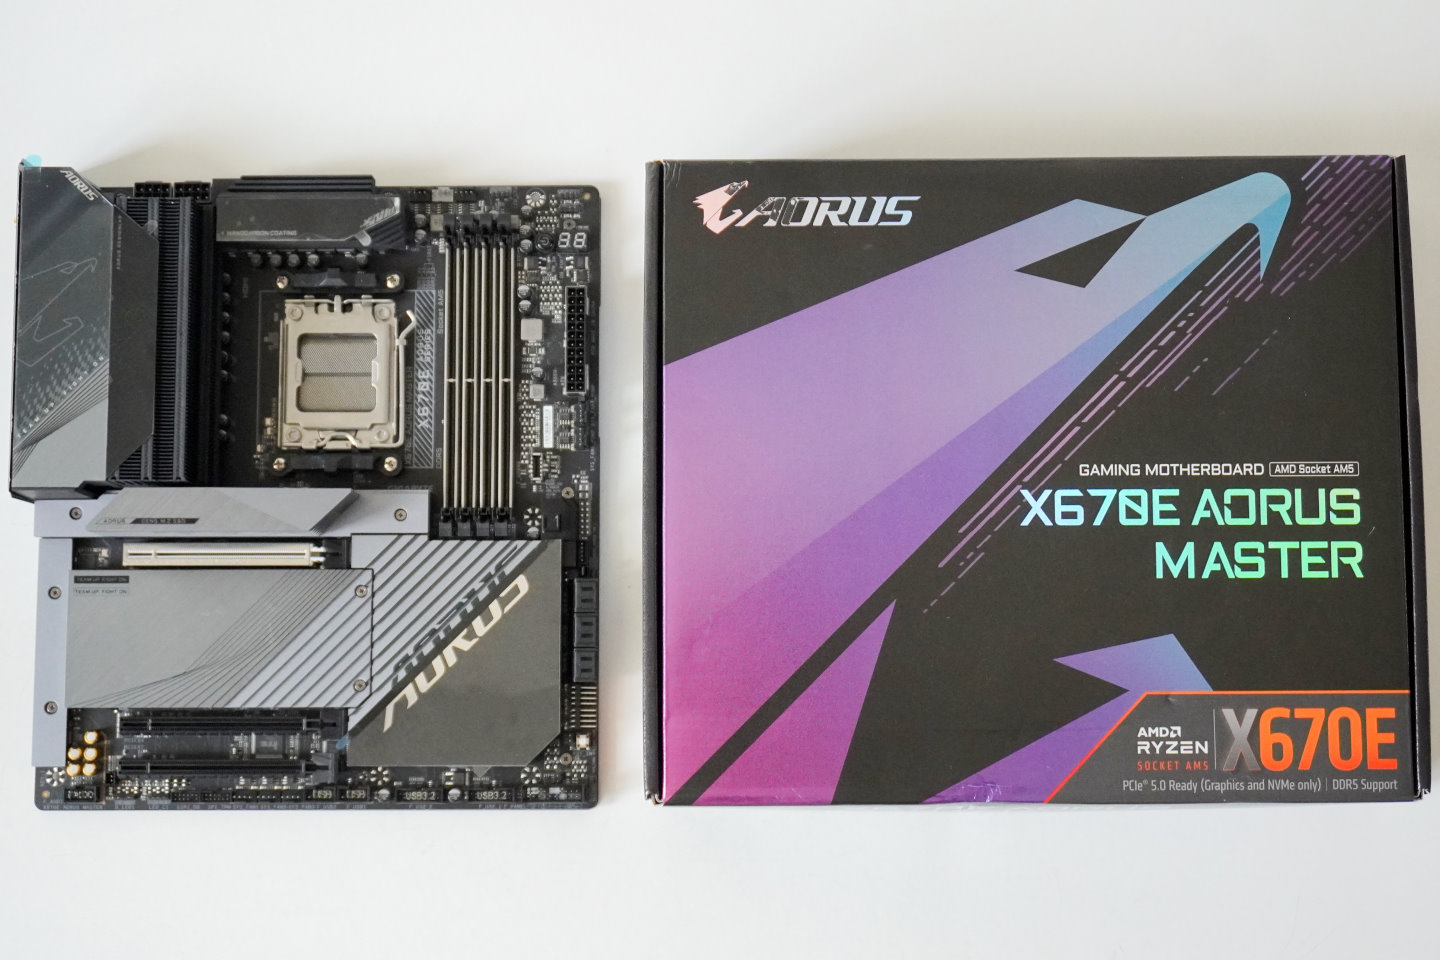 The motherboard used in the test is GIGABYTE X670E AORUS Master, with AMD Ryzen 7 7700X processor.